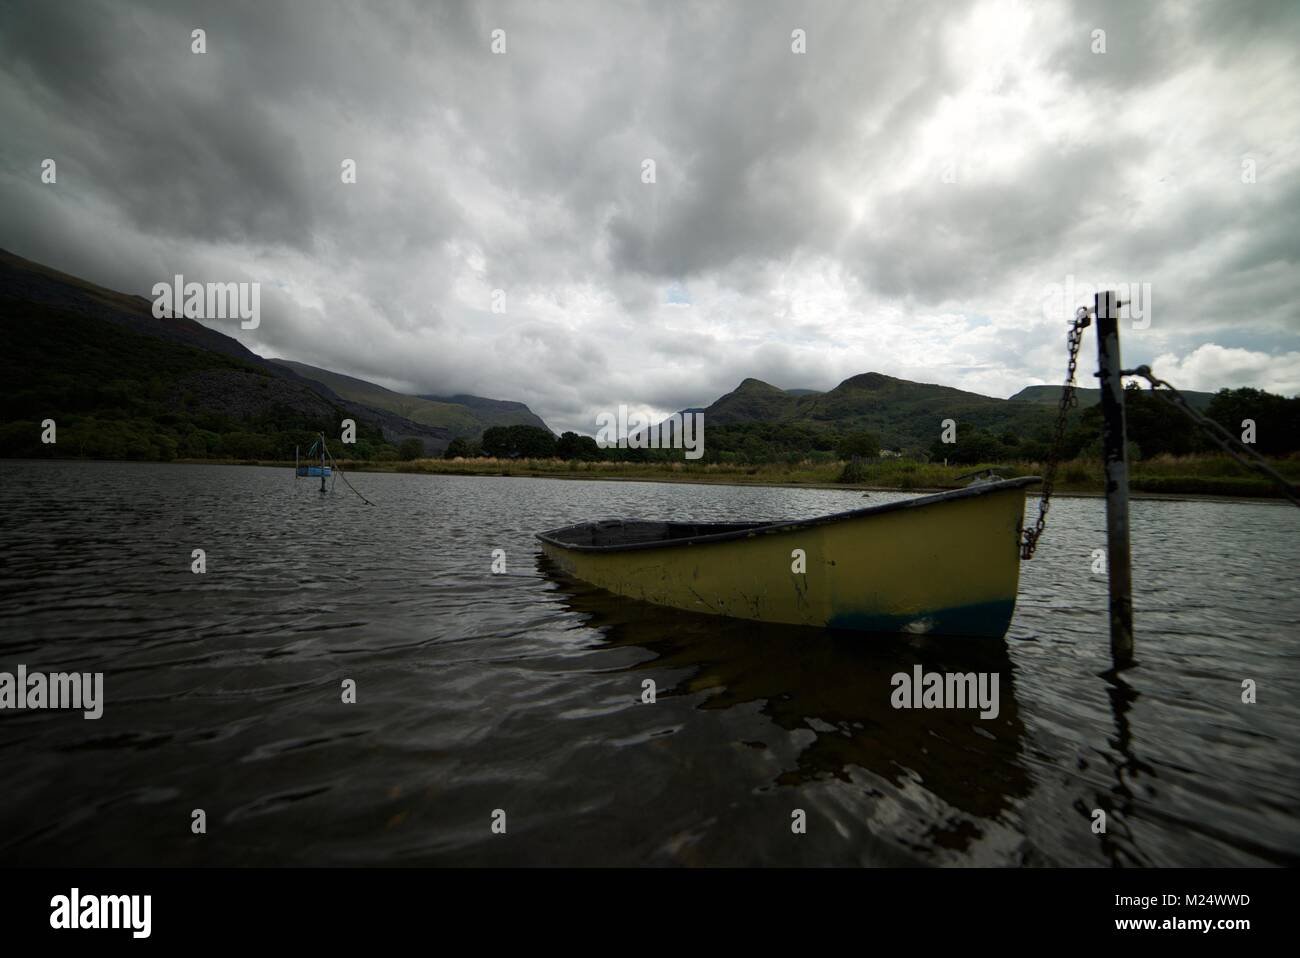 Yellow wooden paddle boat tied up on a lake in Snowdonia National Park, with a cloudy sky overhead surrounded by mountains Stock Photo